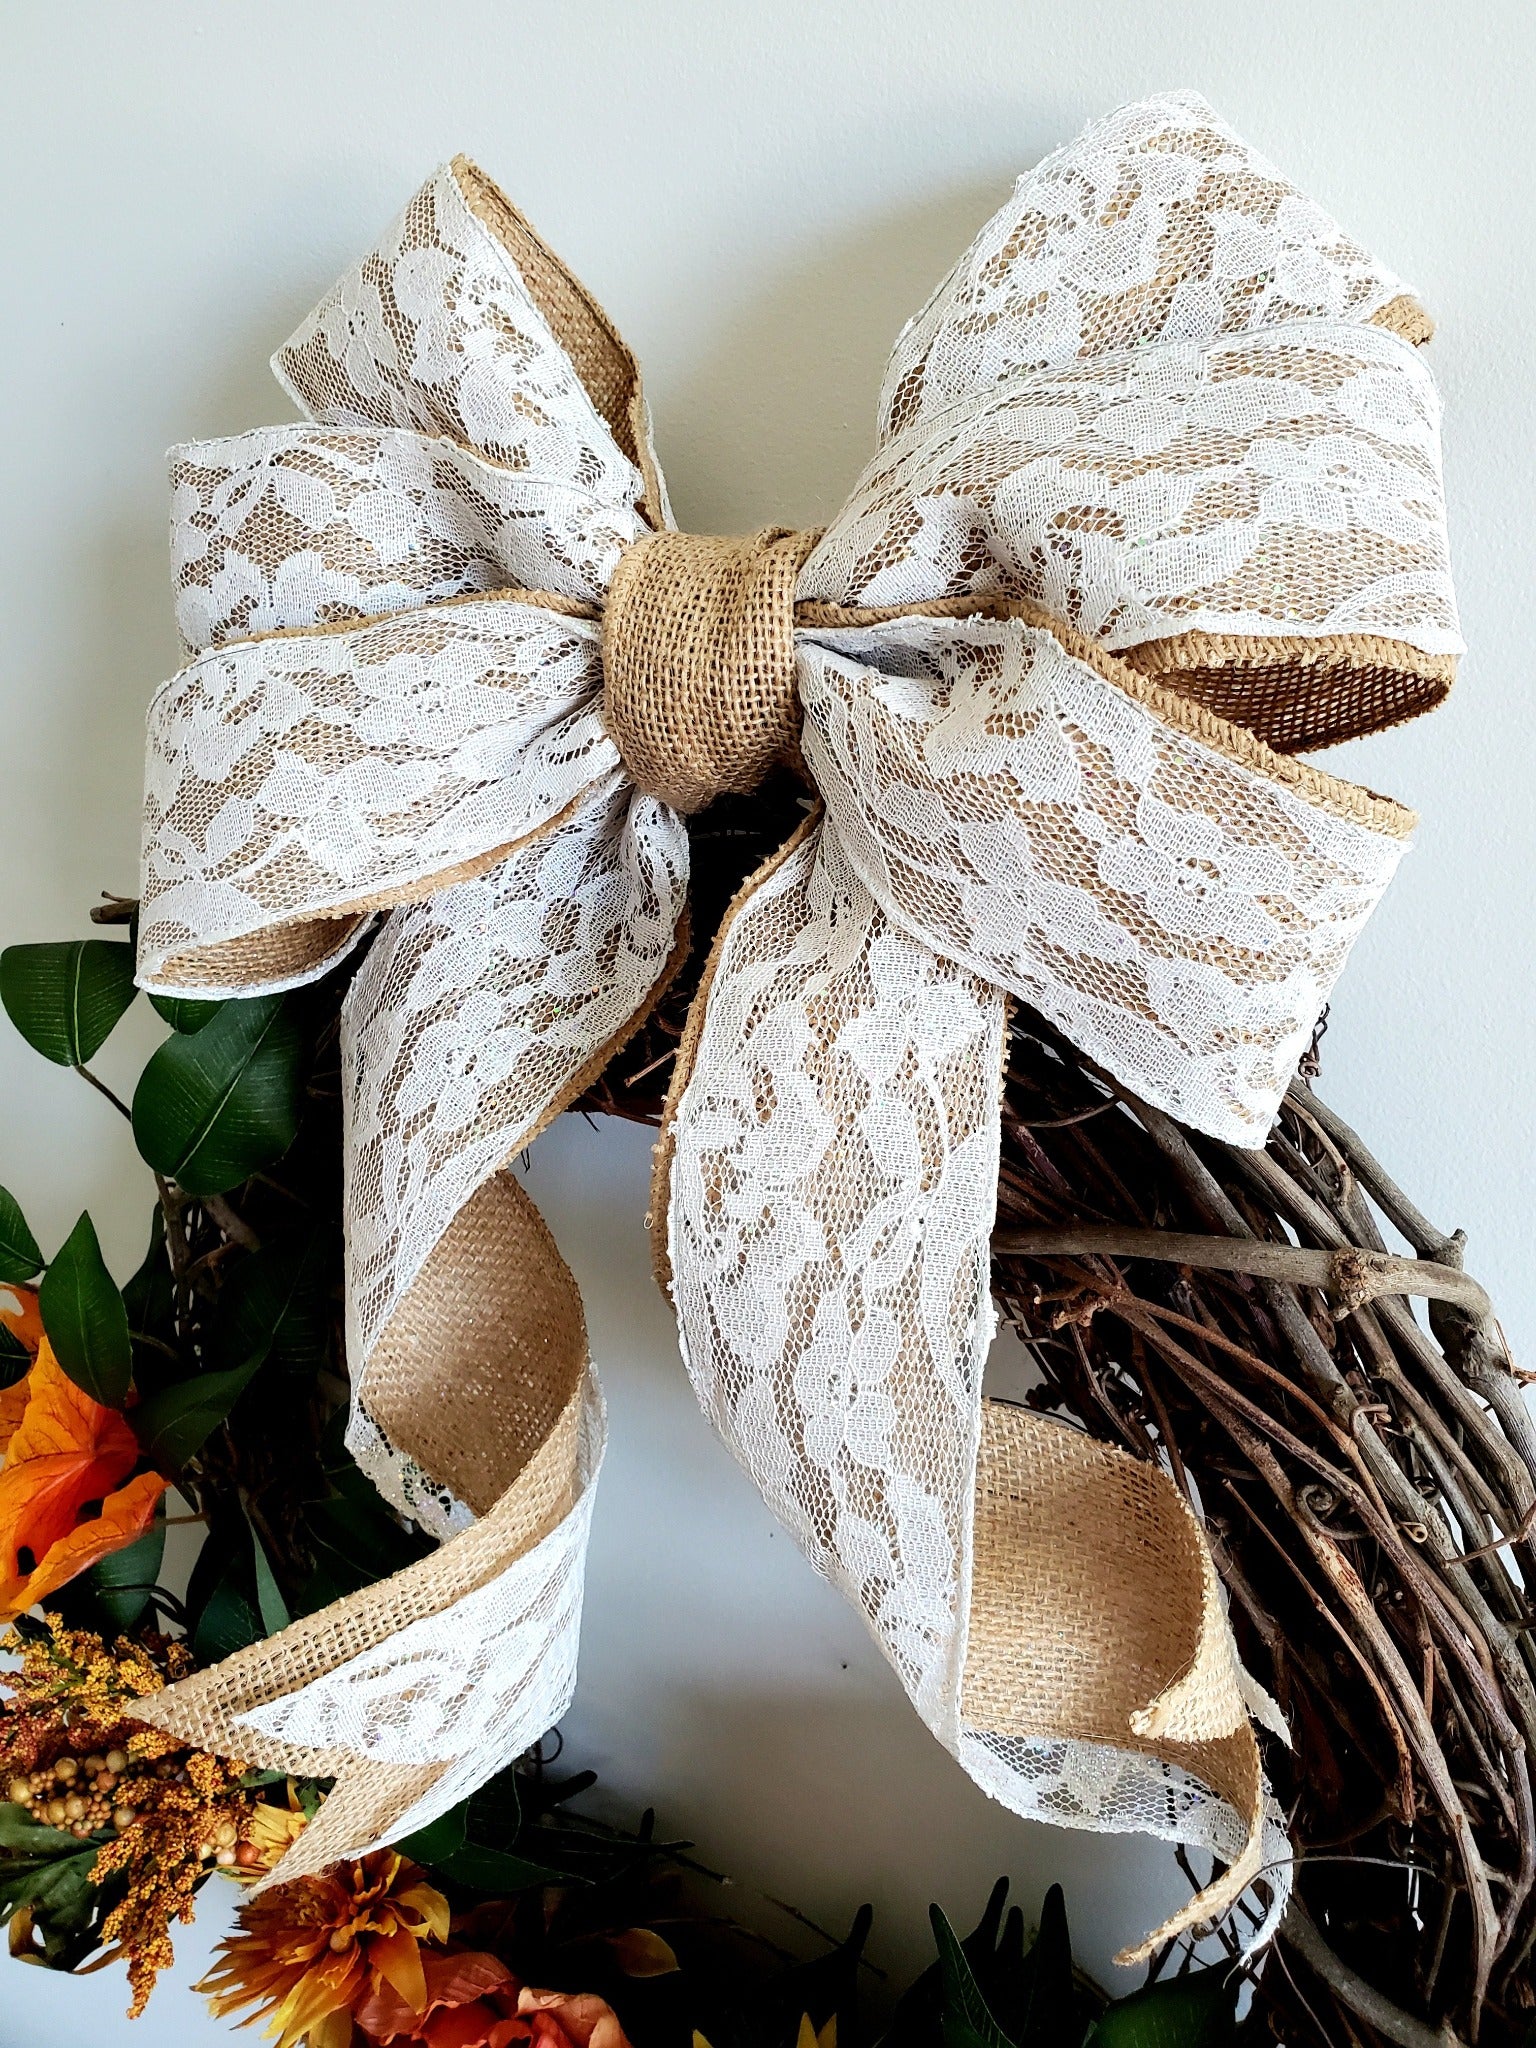 Large 10 Hand Made Burlap Bow Rustic Country Wedding Fall Pew Natural  Wreath